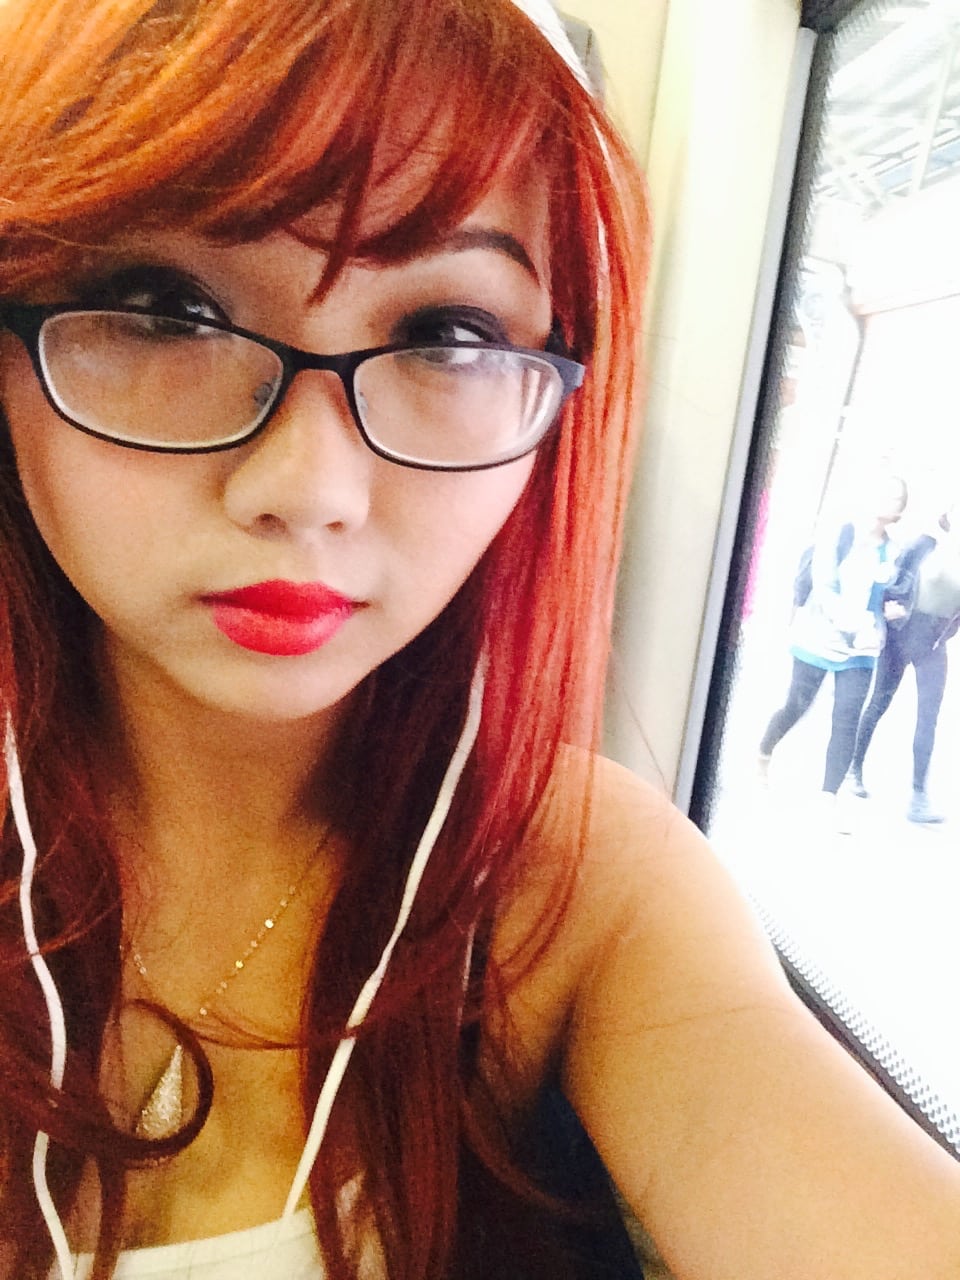 Red hair on the train at charing Cross